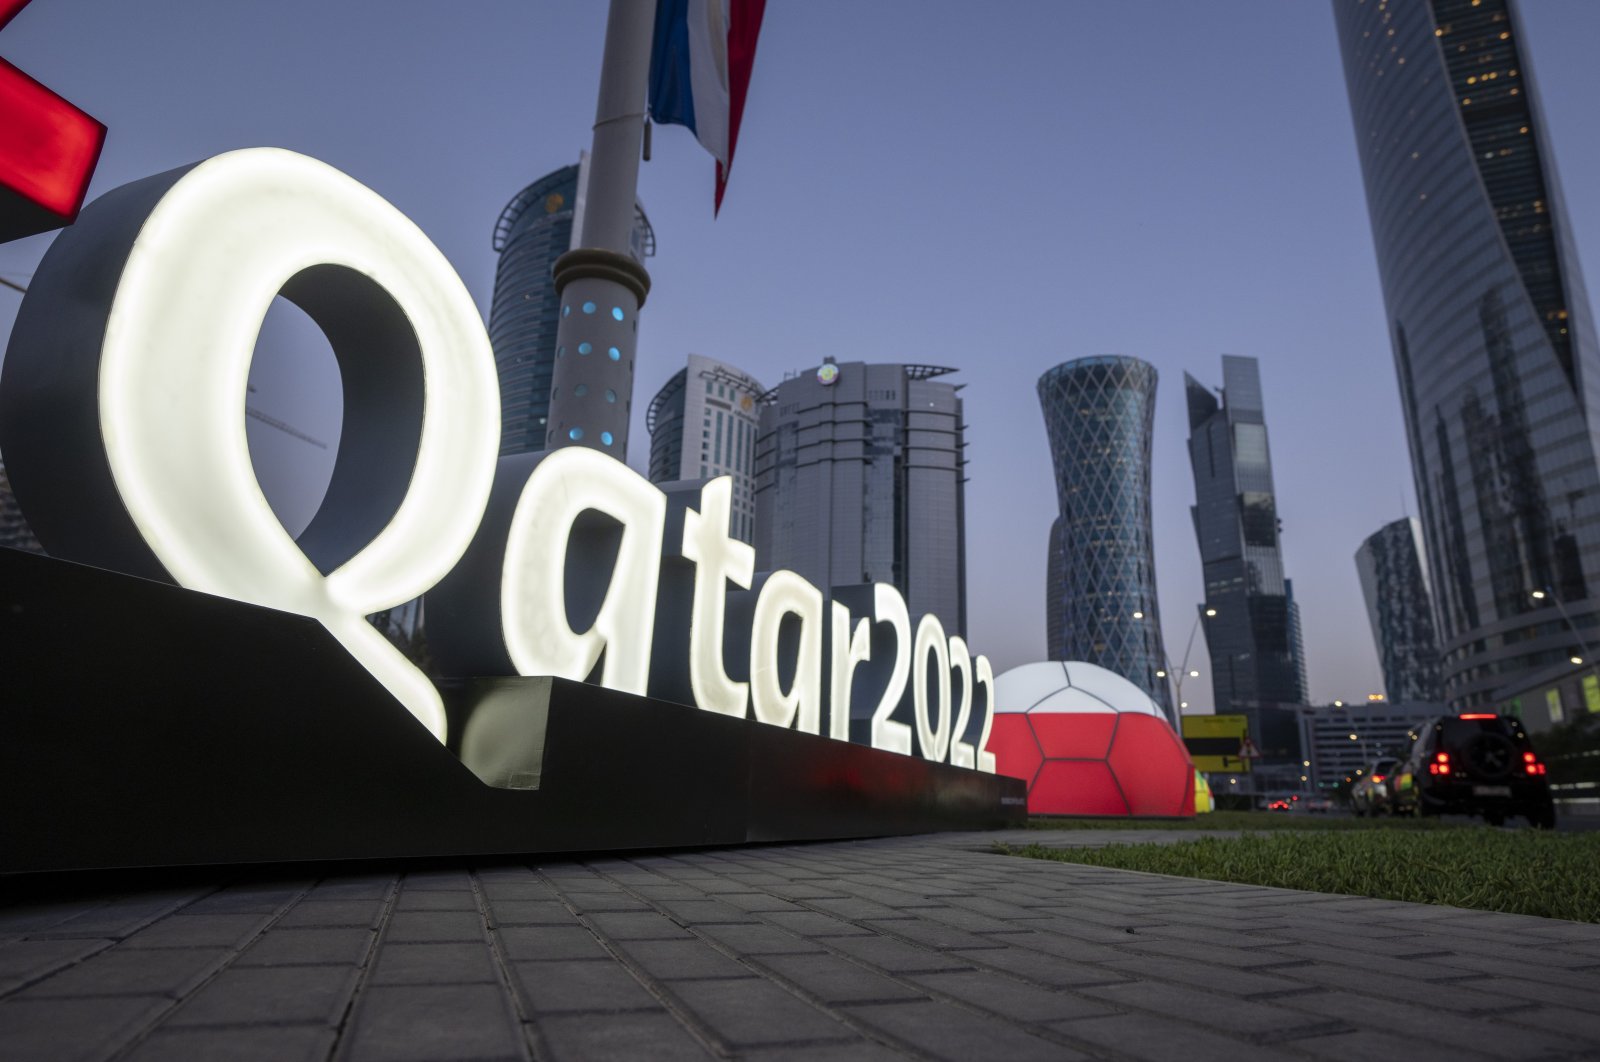 World Cup branding is seen in Doha, Qatar, March 31, 2022. (AP Photo)